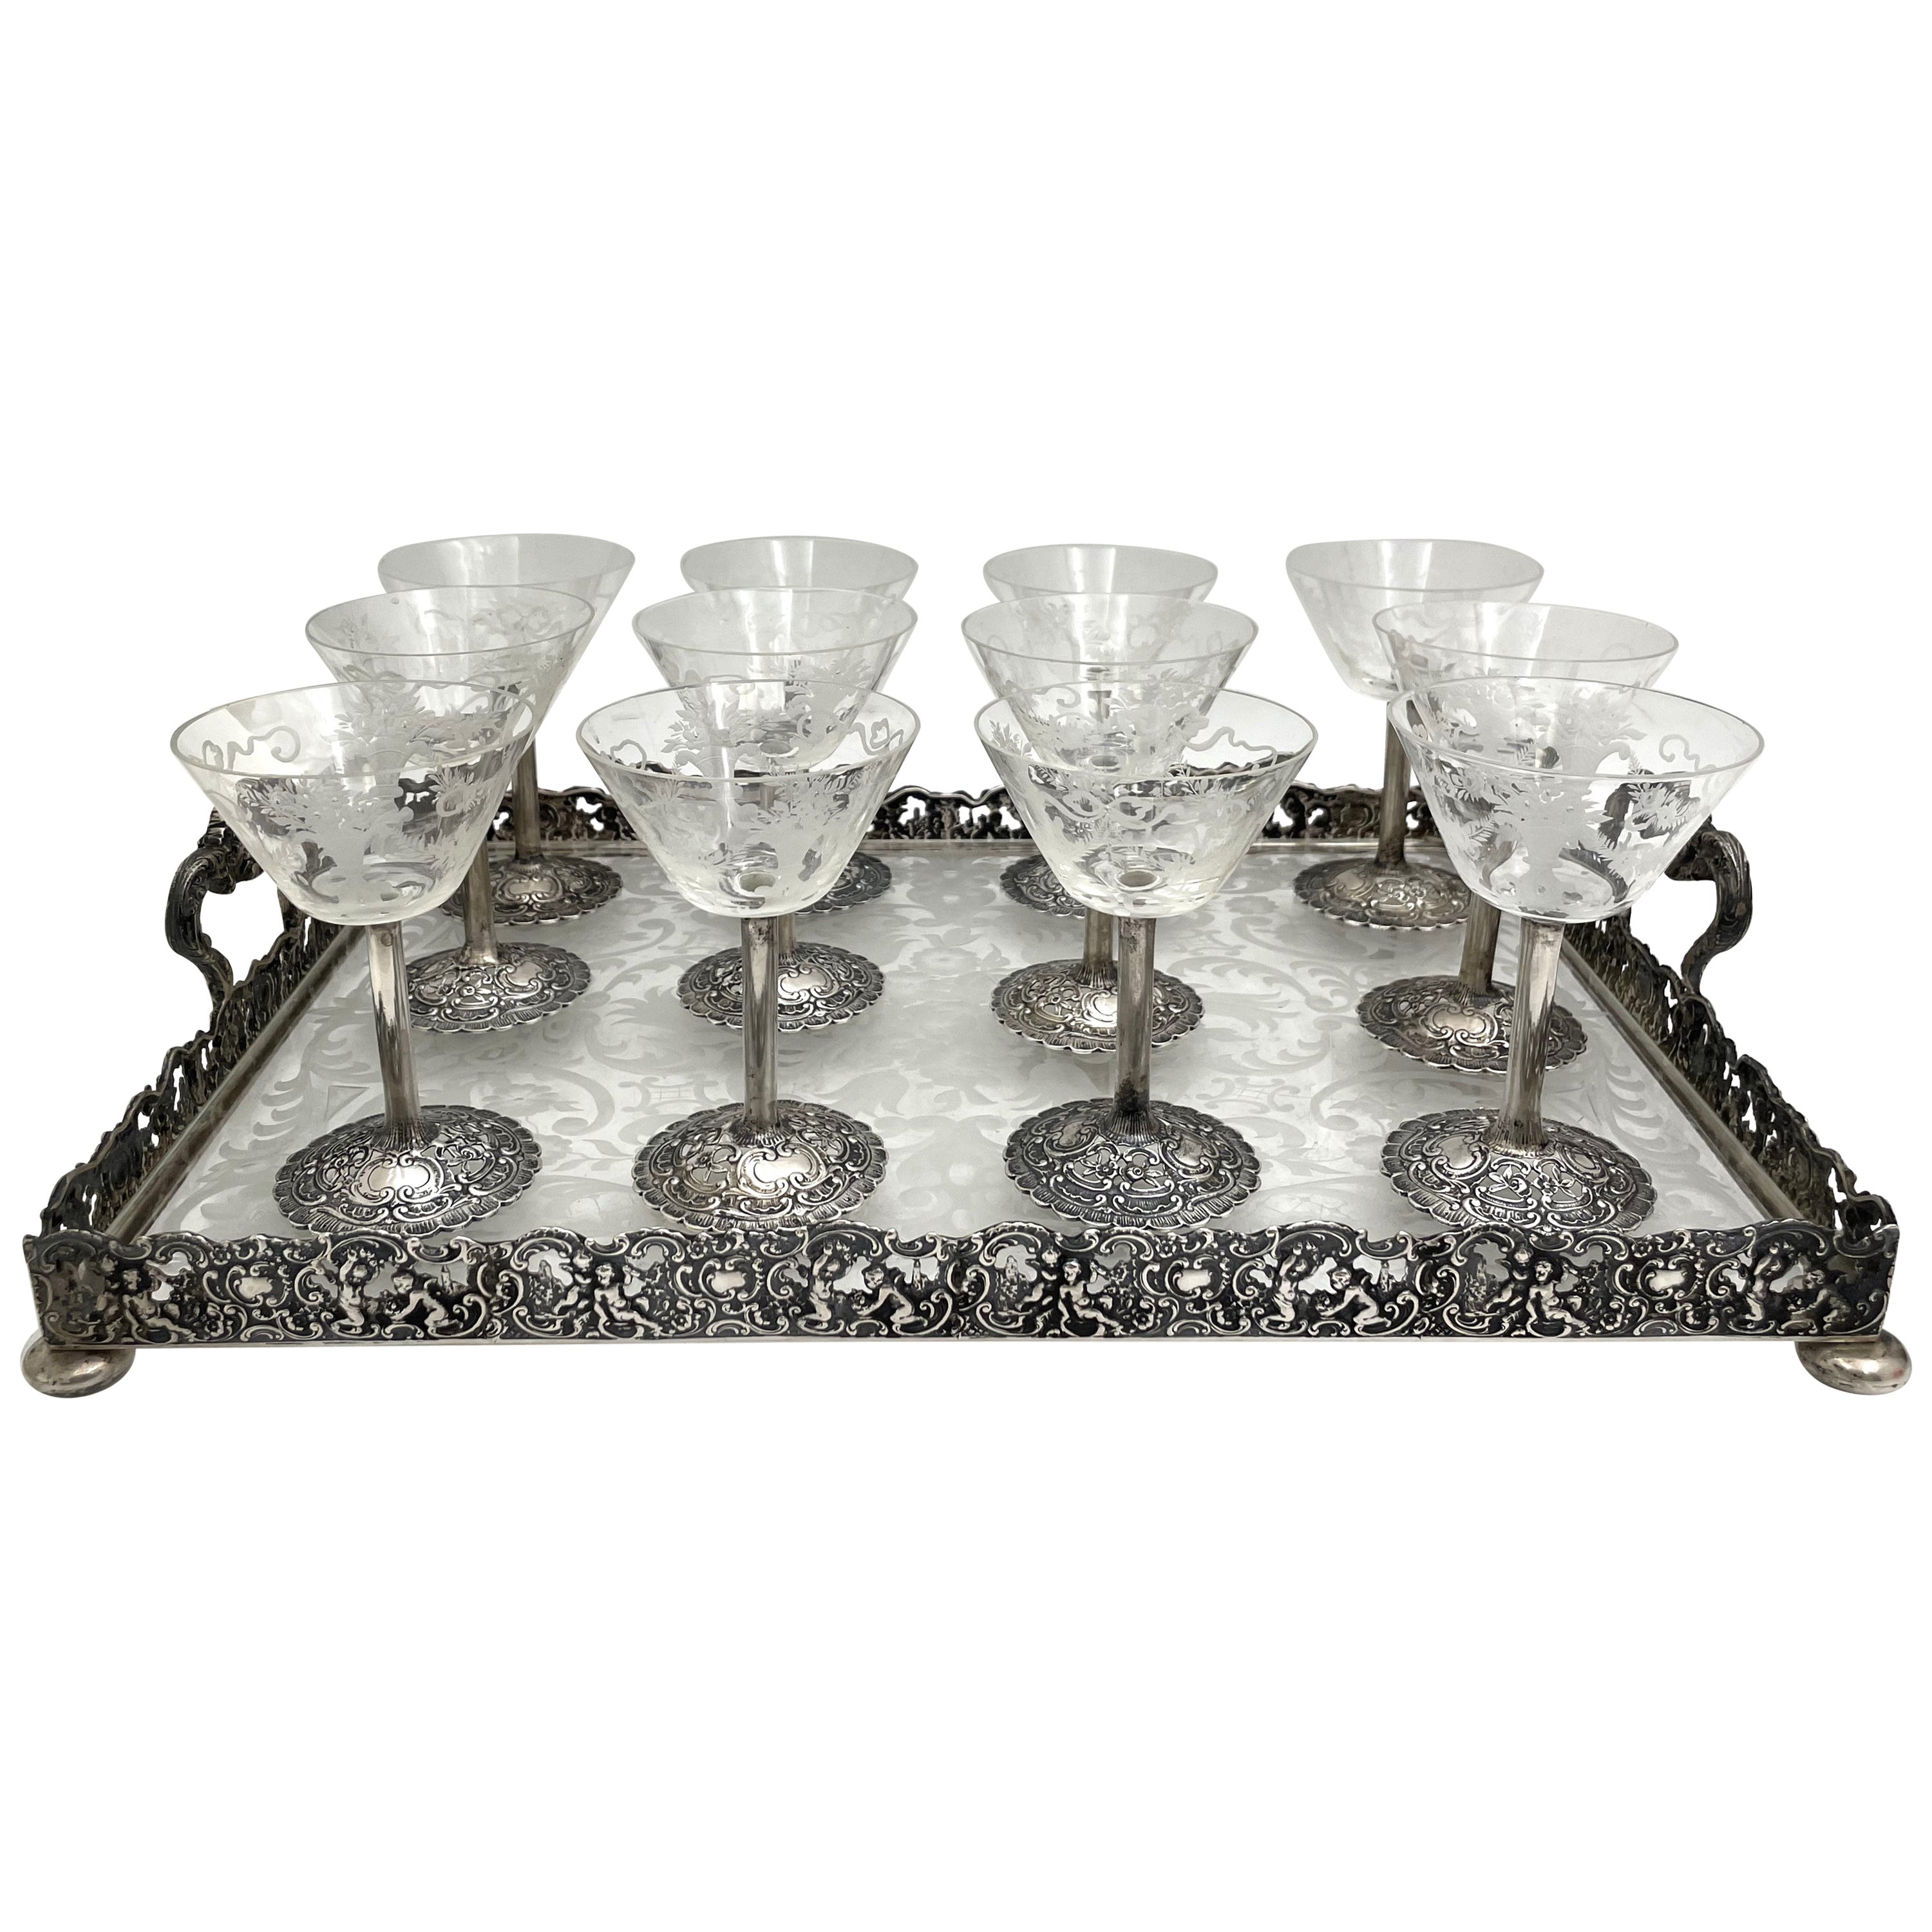 German Continental Silver & Etched Glass Set of 12 Sherbert Cups on Gallery Tray